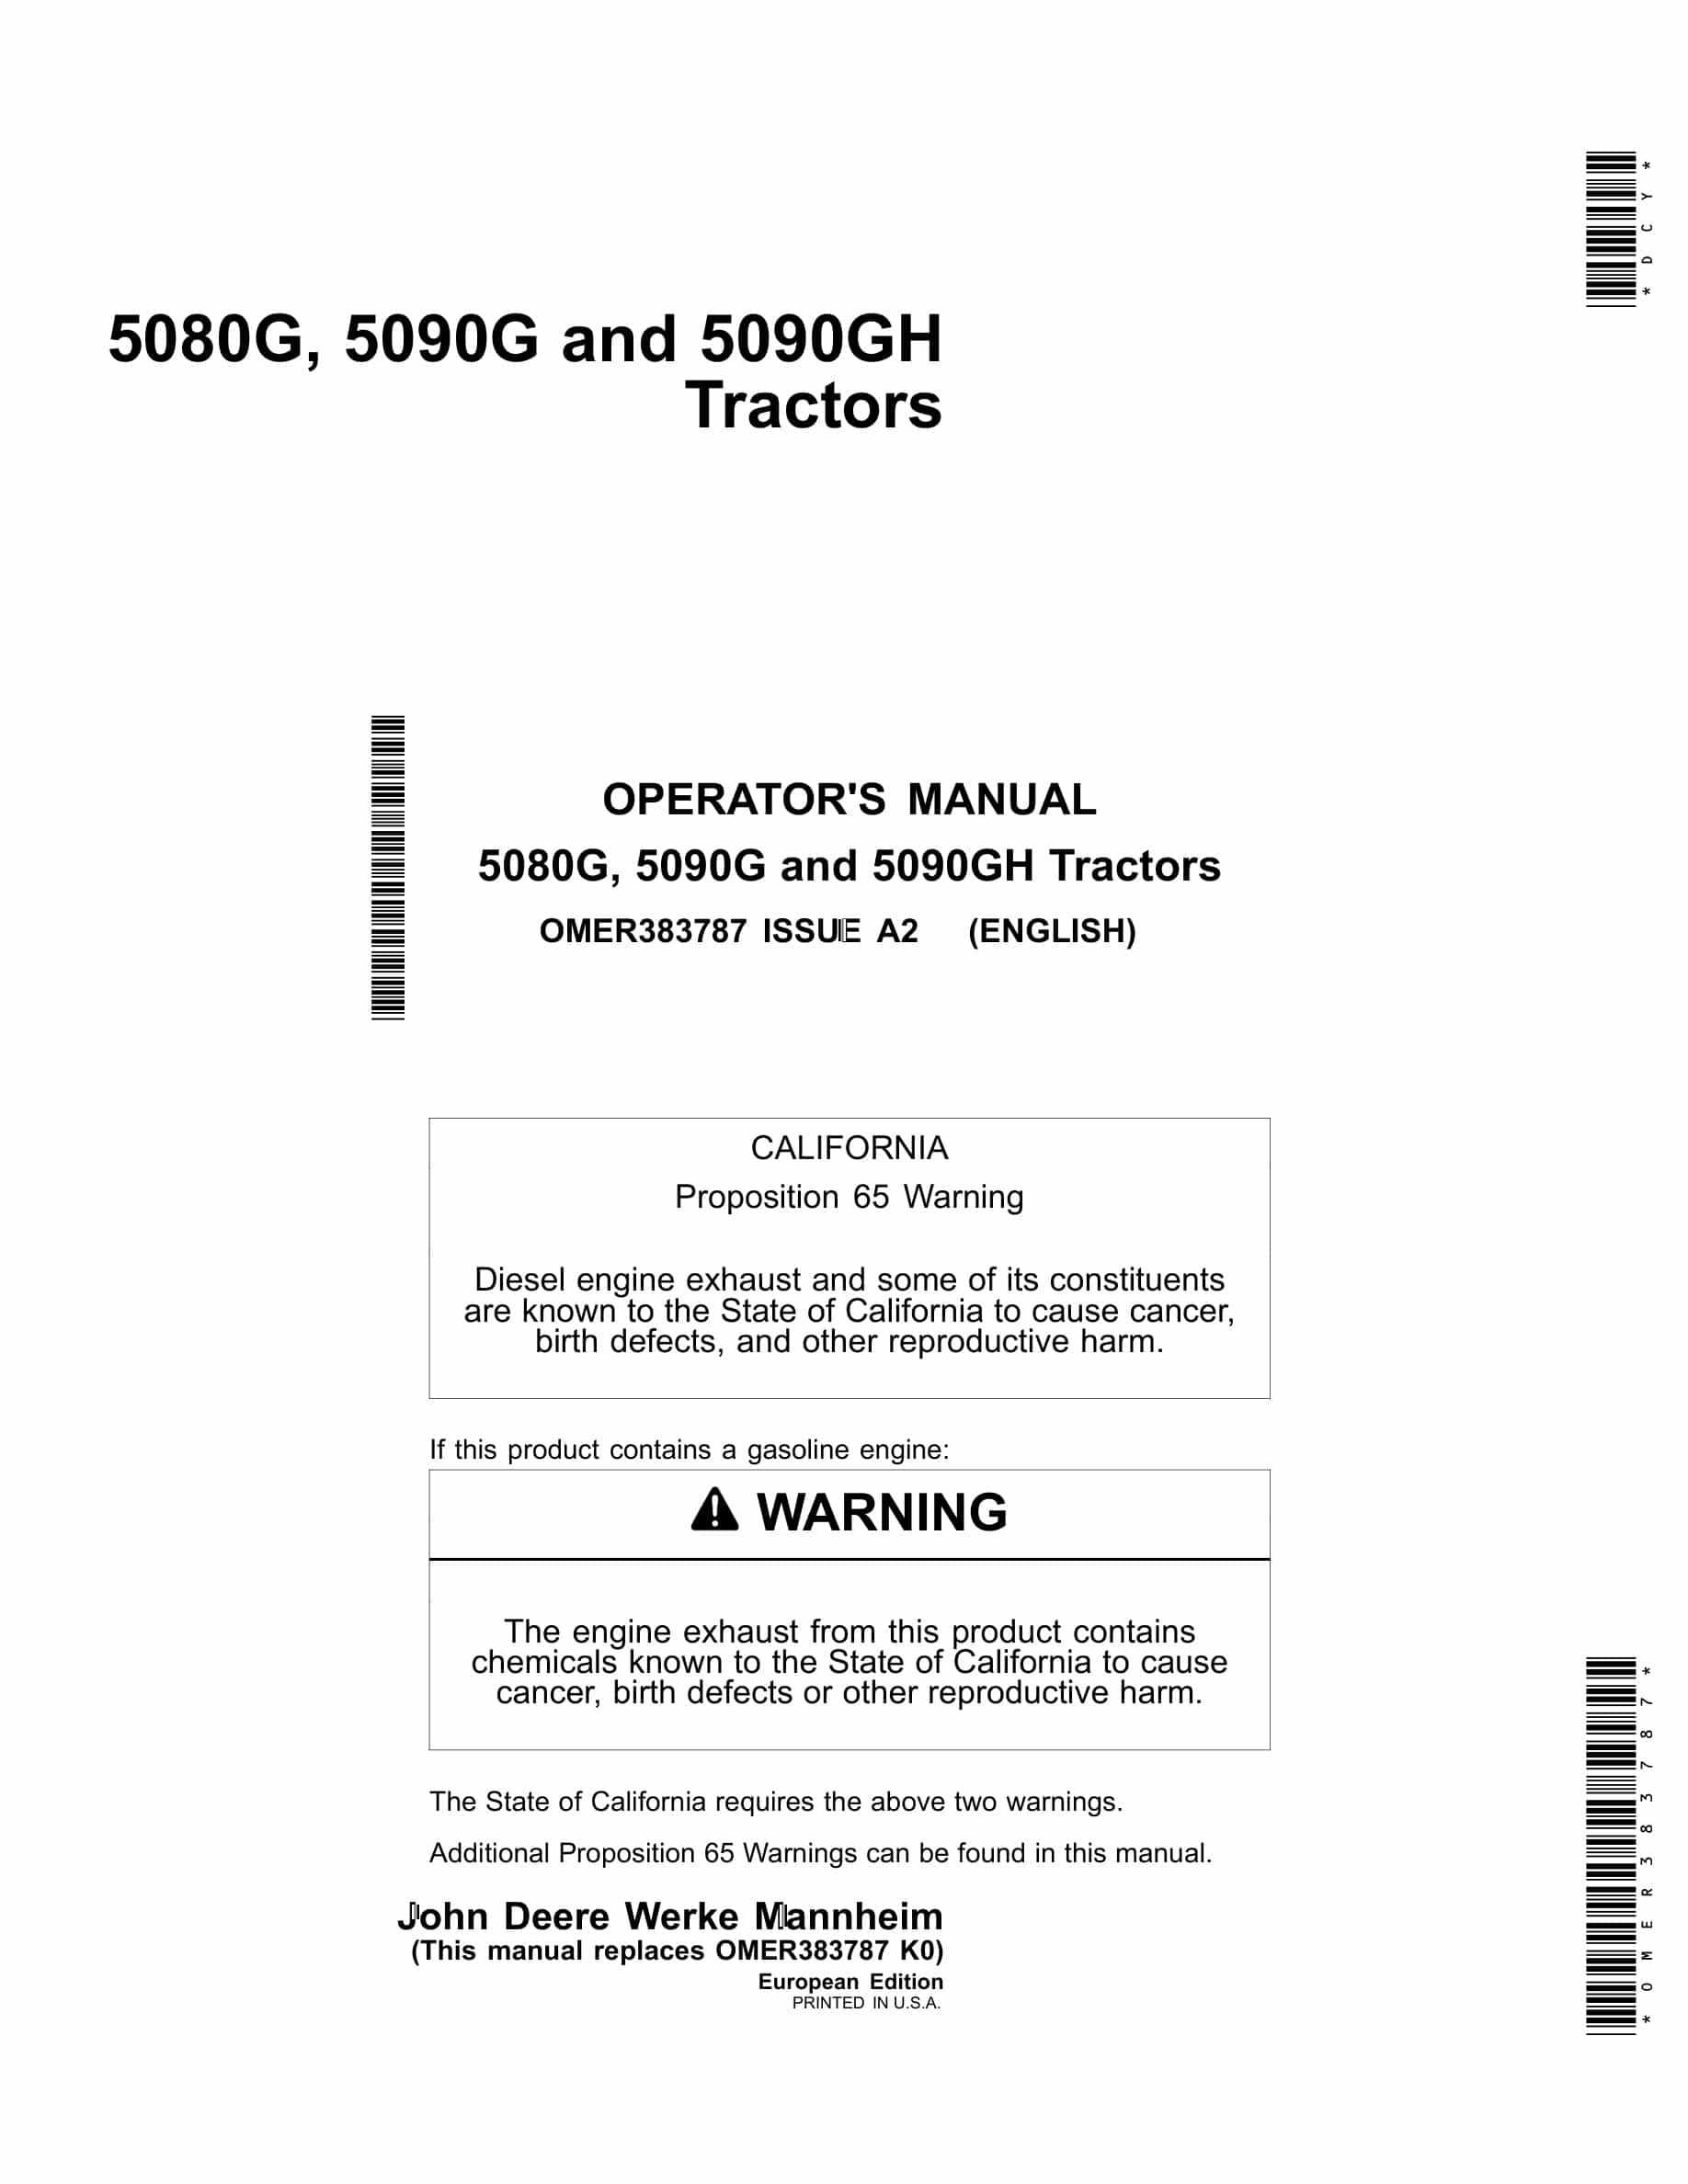 John Deere 5080g, 5090g And 5090gh Tractors Operator Manuals OMER383787-1